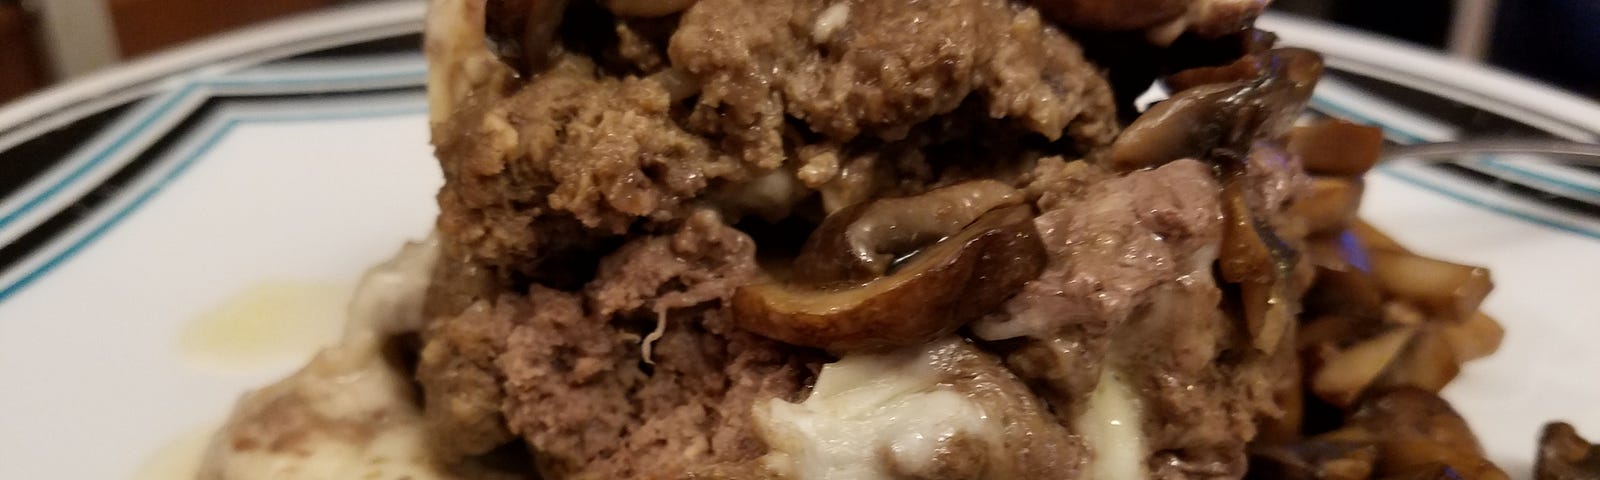 A ball shaped hamburger patty that had been stuffed with cheese and cooked in a presure cooker, then topped with sauteed mushrooms on a white plate.